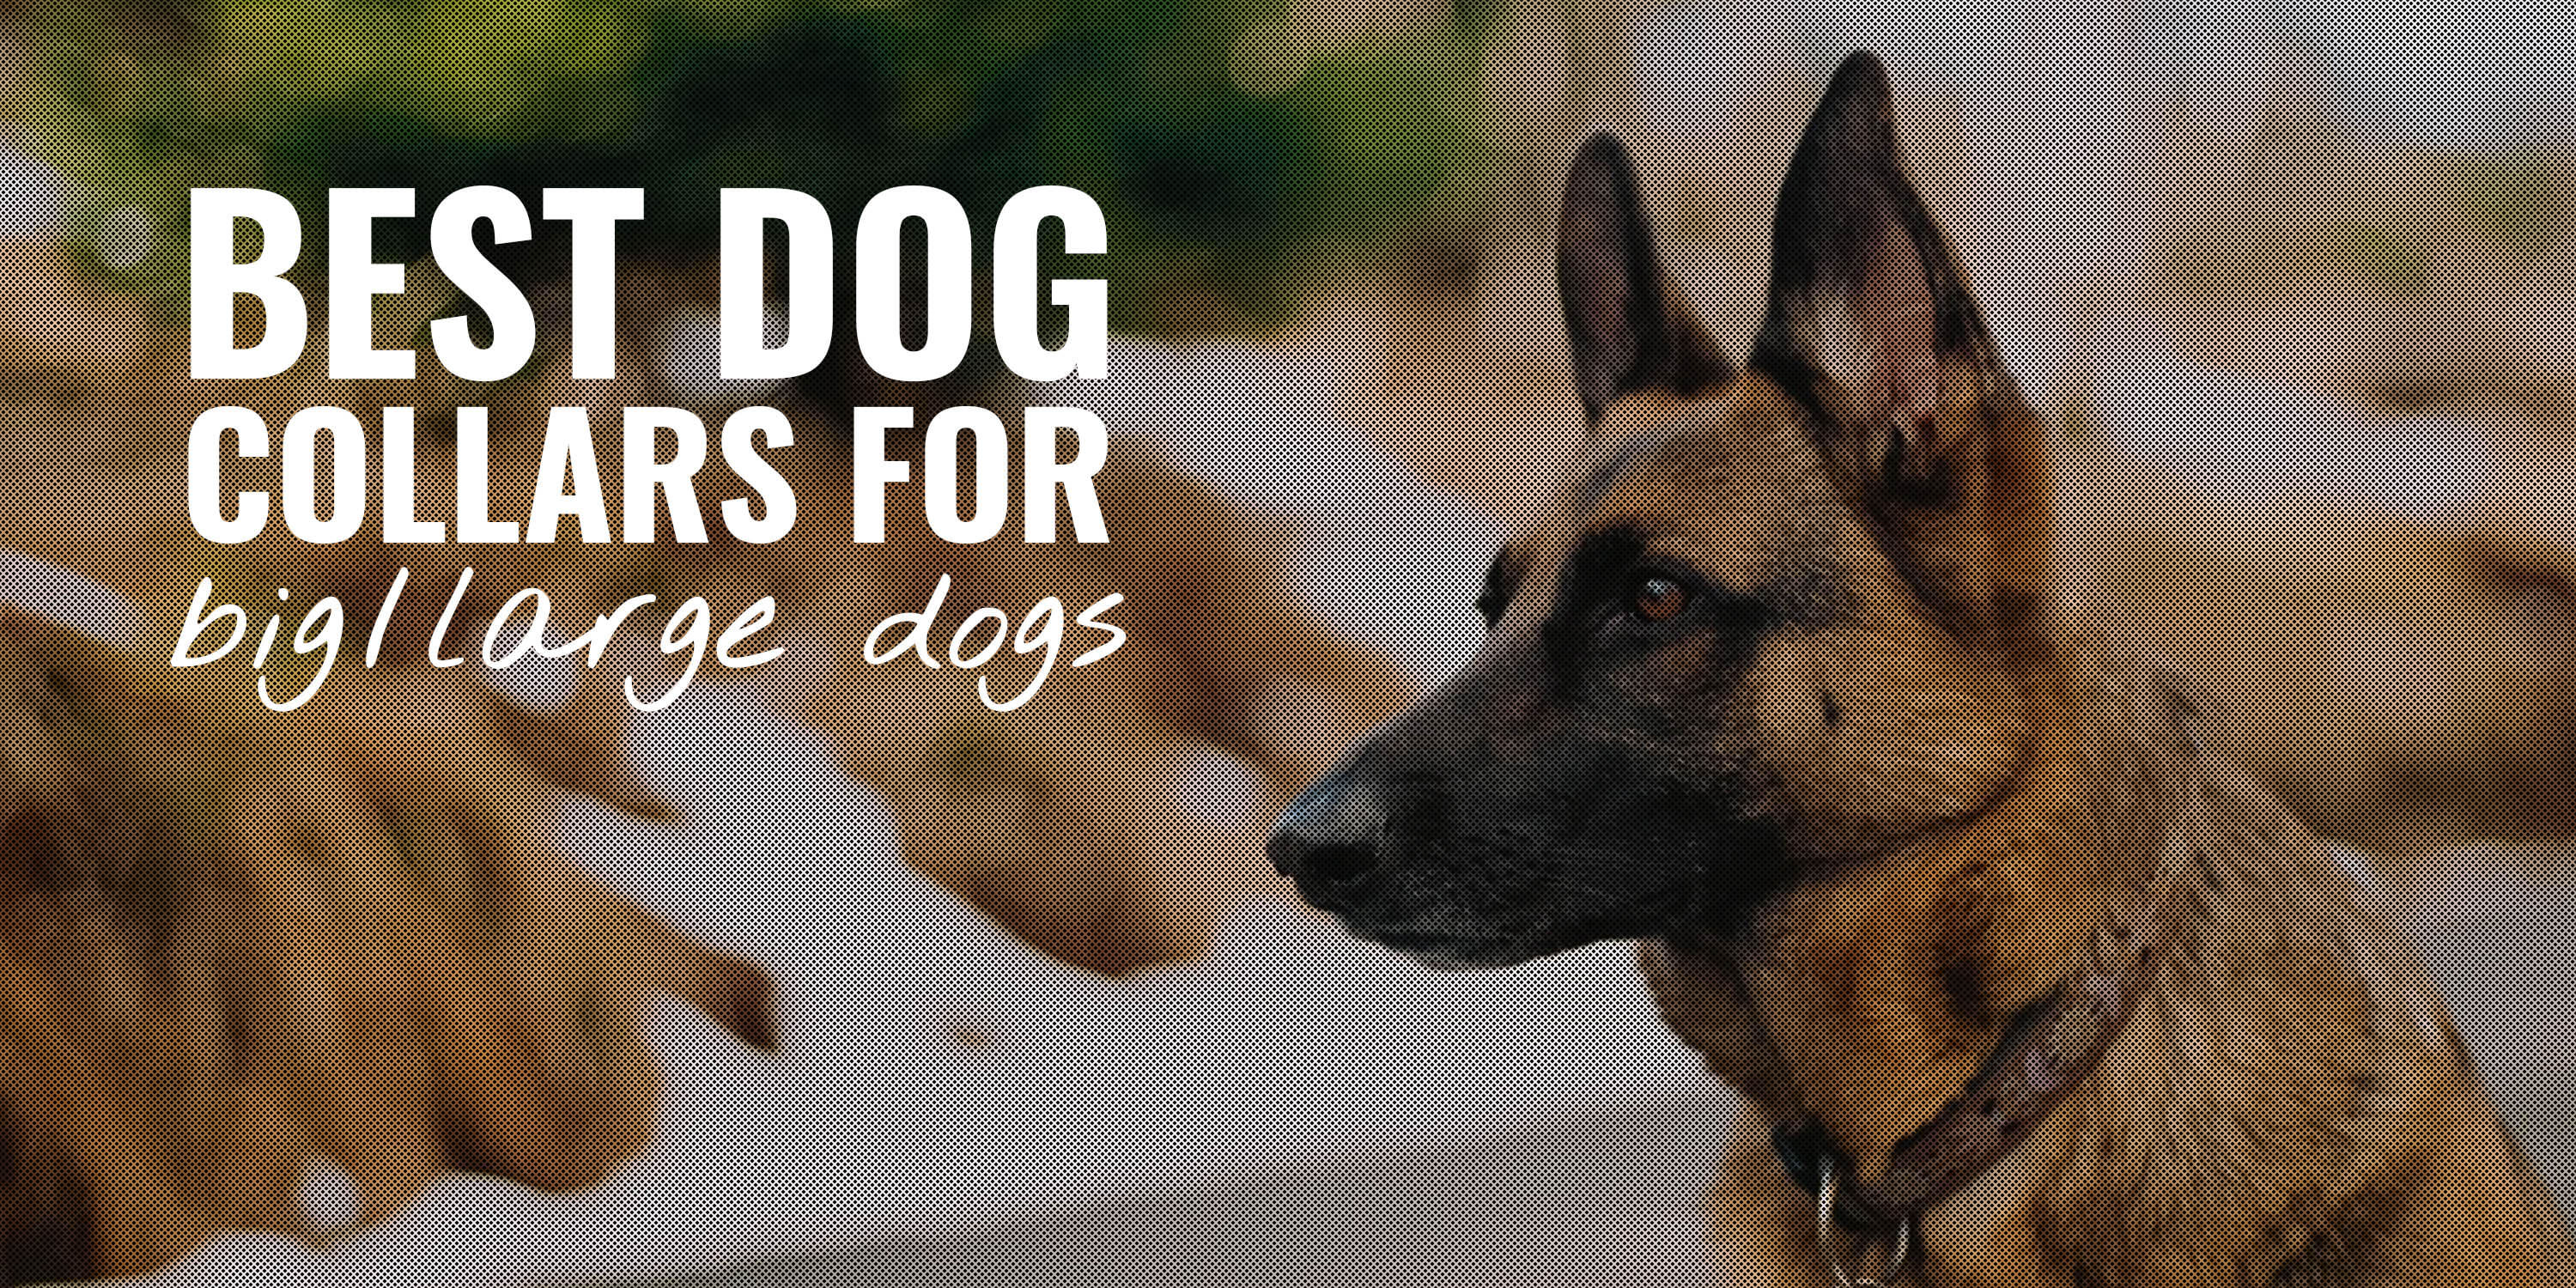 10 Best Dog Collars For Big Dogs - Breeding Business